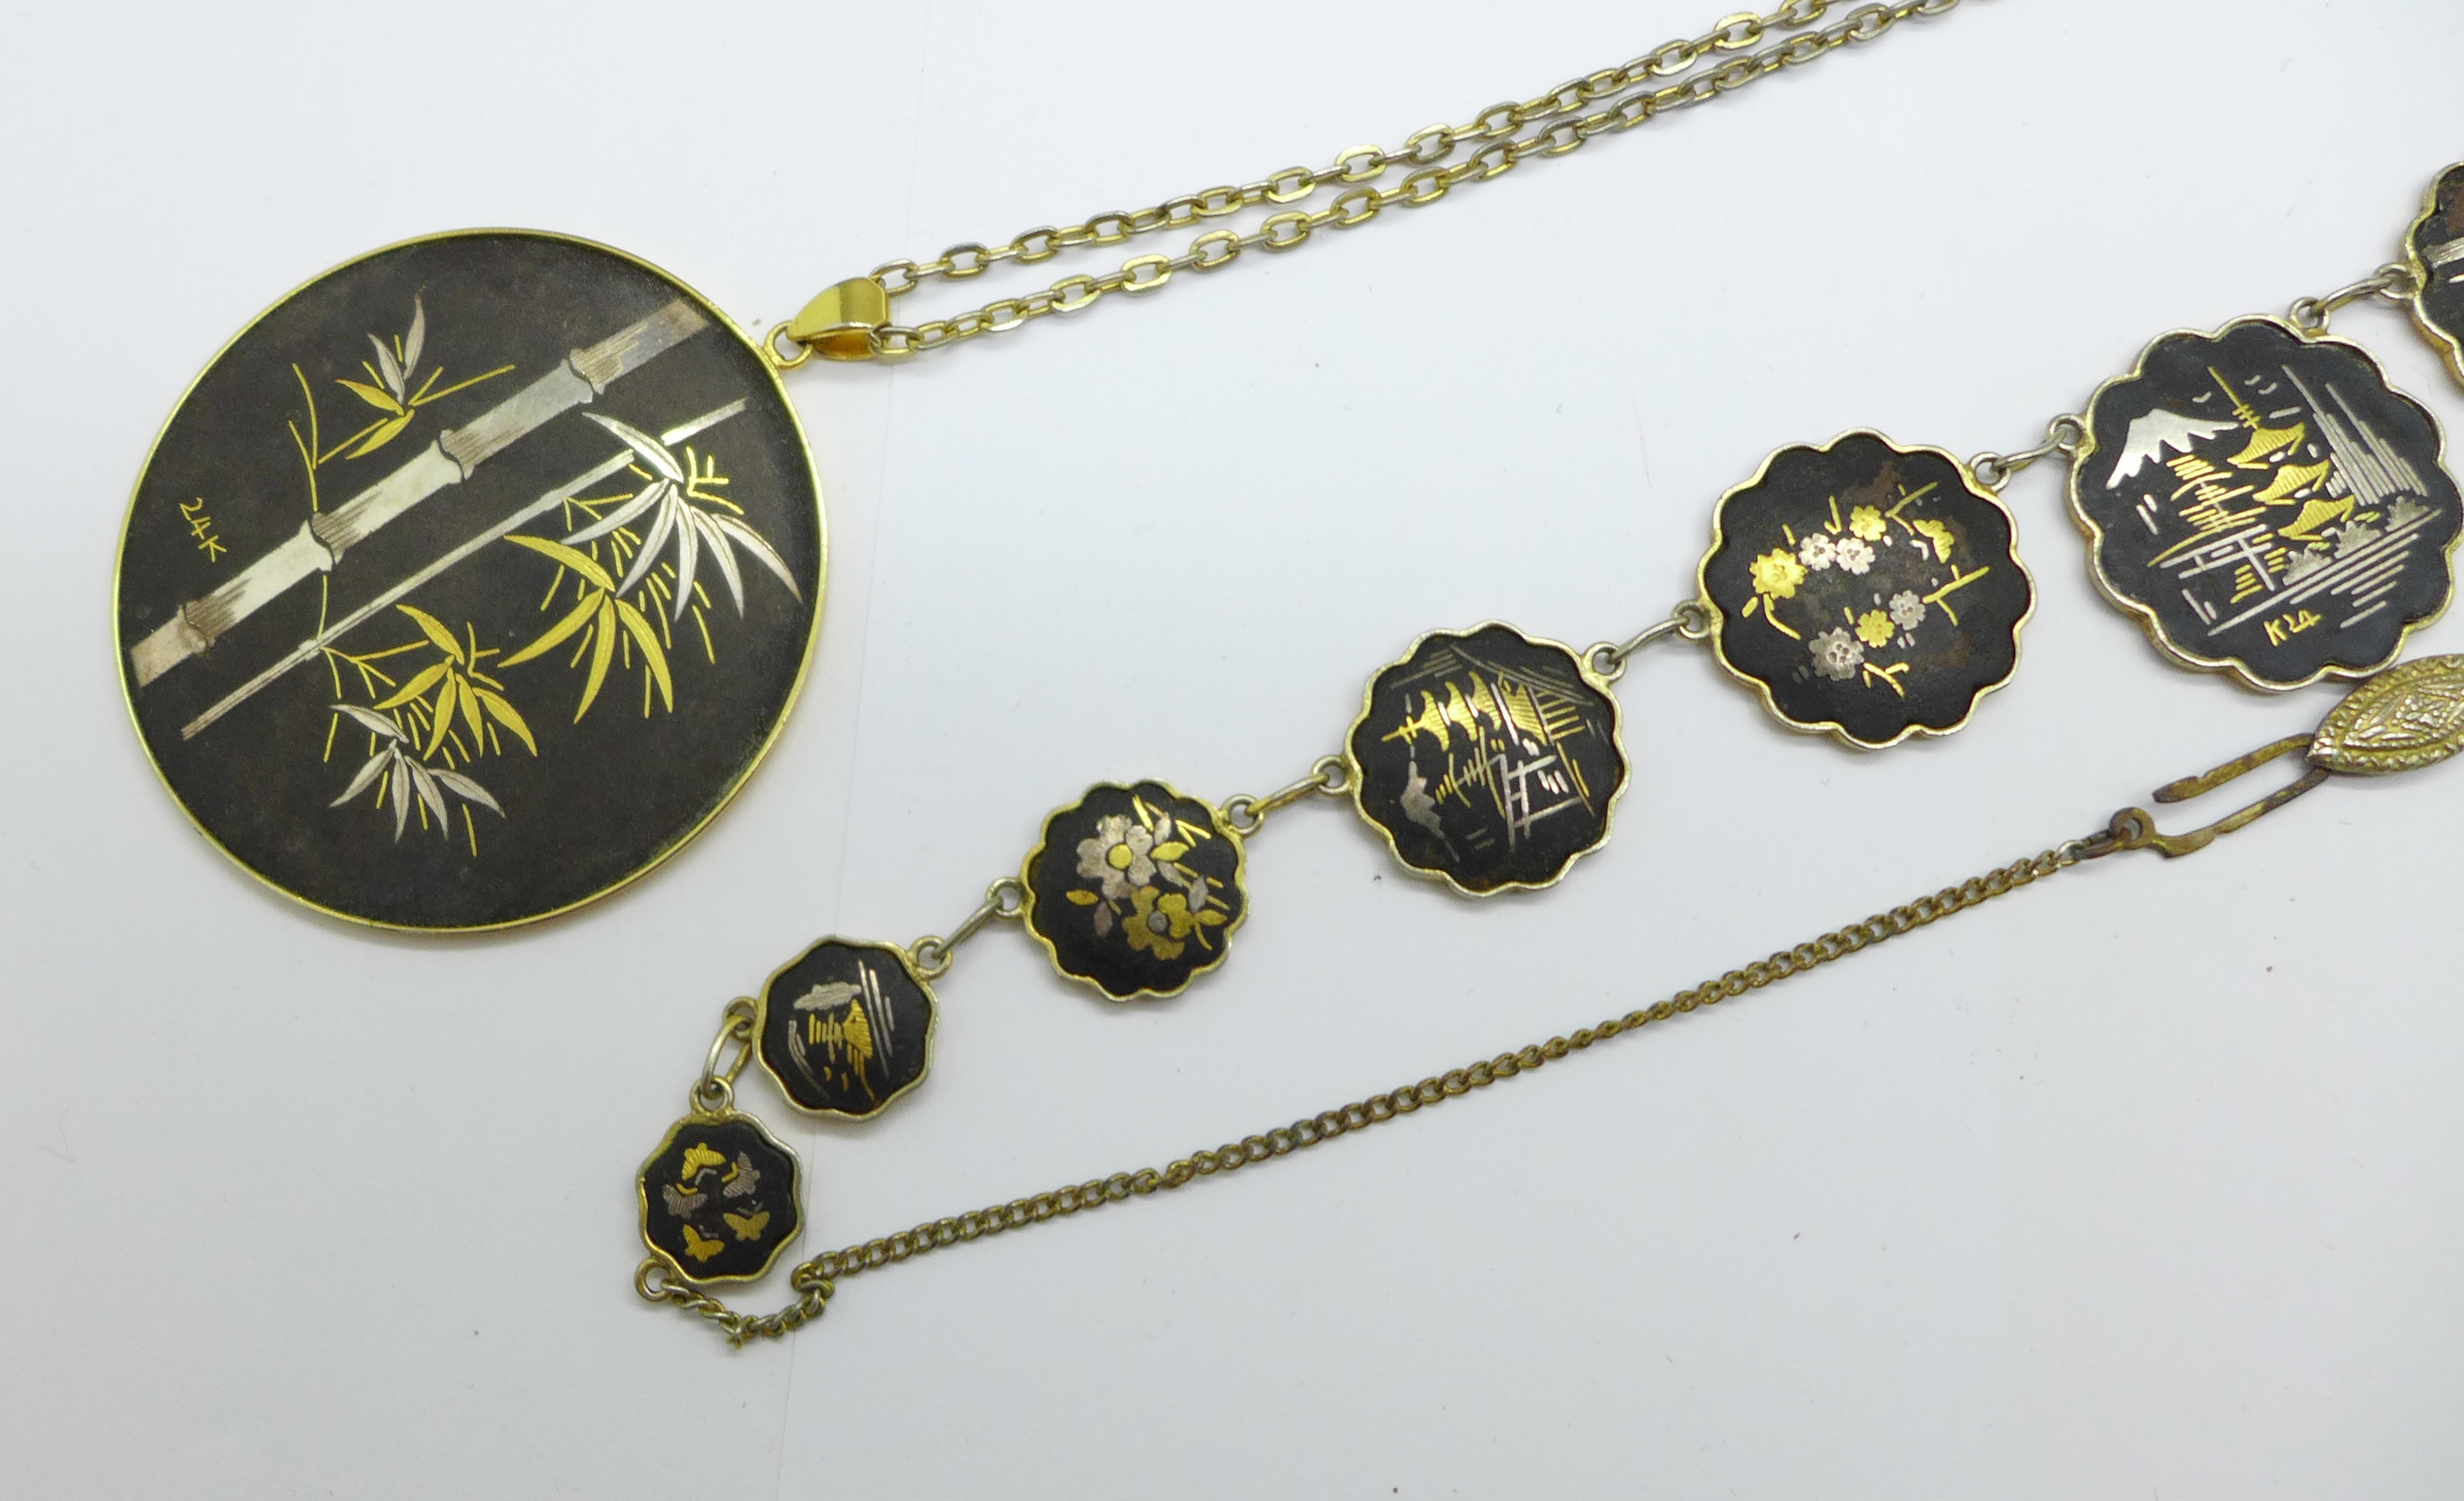 A Japanese Damascene necklace and pendant inlaid with 24k gold and 14k gold - Image 2 of 2